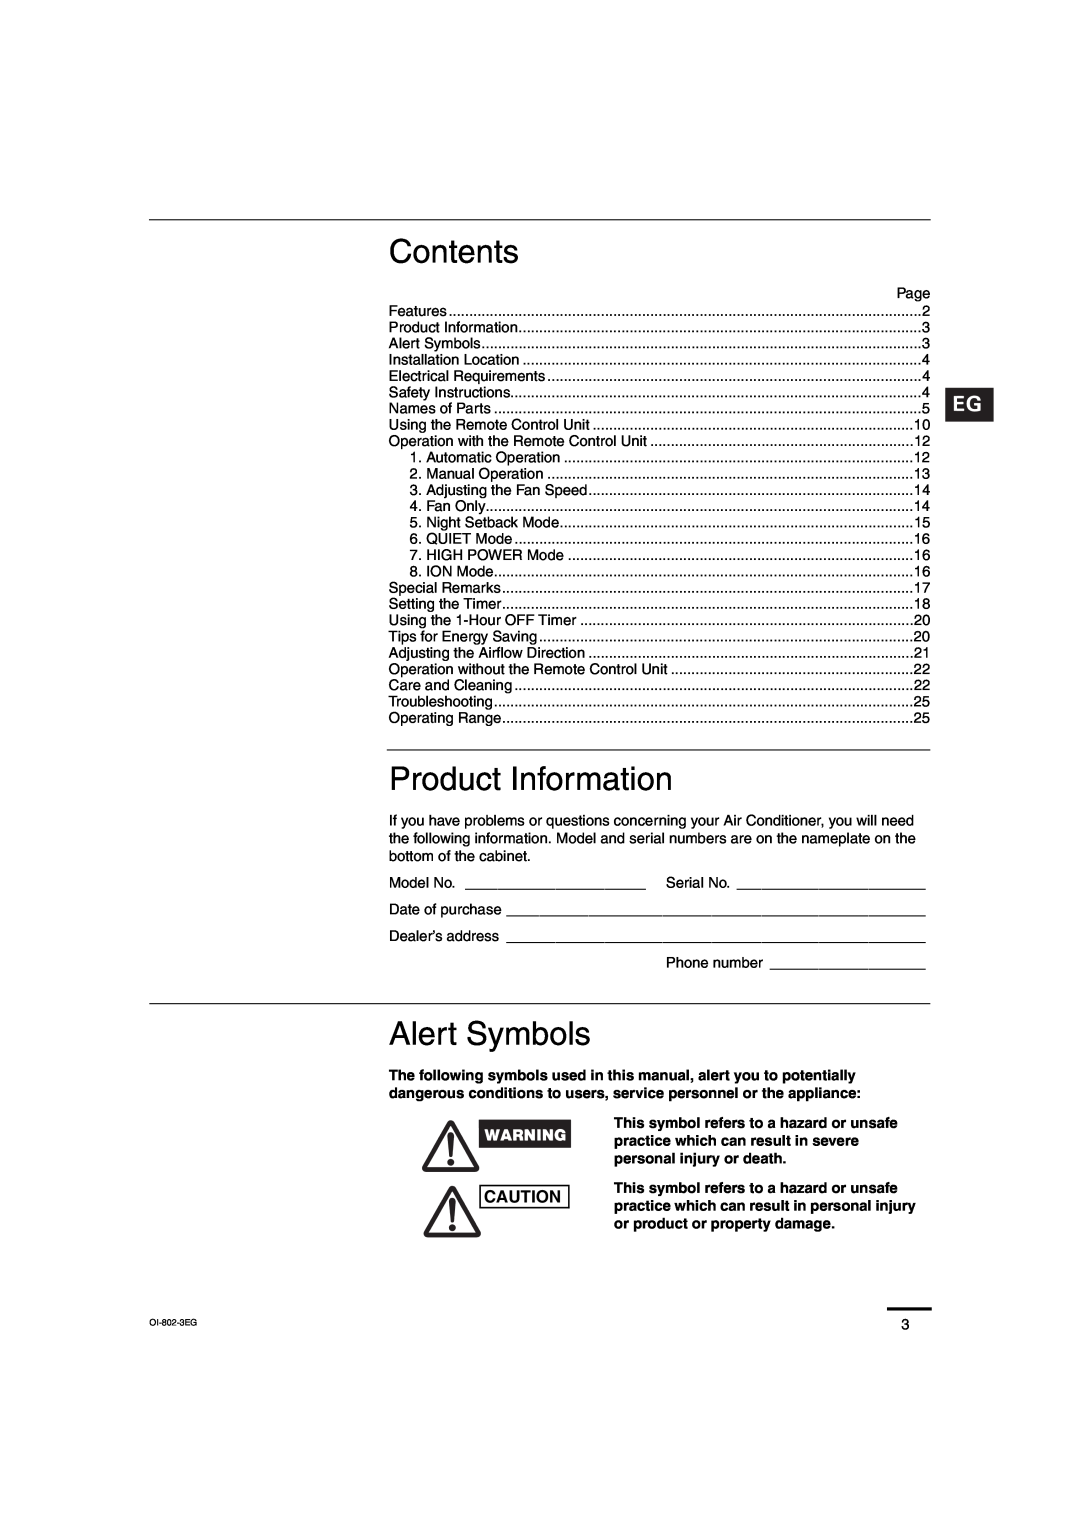 Sanyo CH1271, CH0971 service manual Contents, Product Information, Alert Symbols 